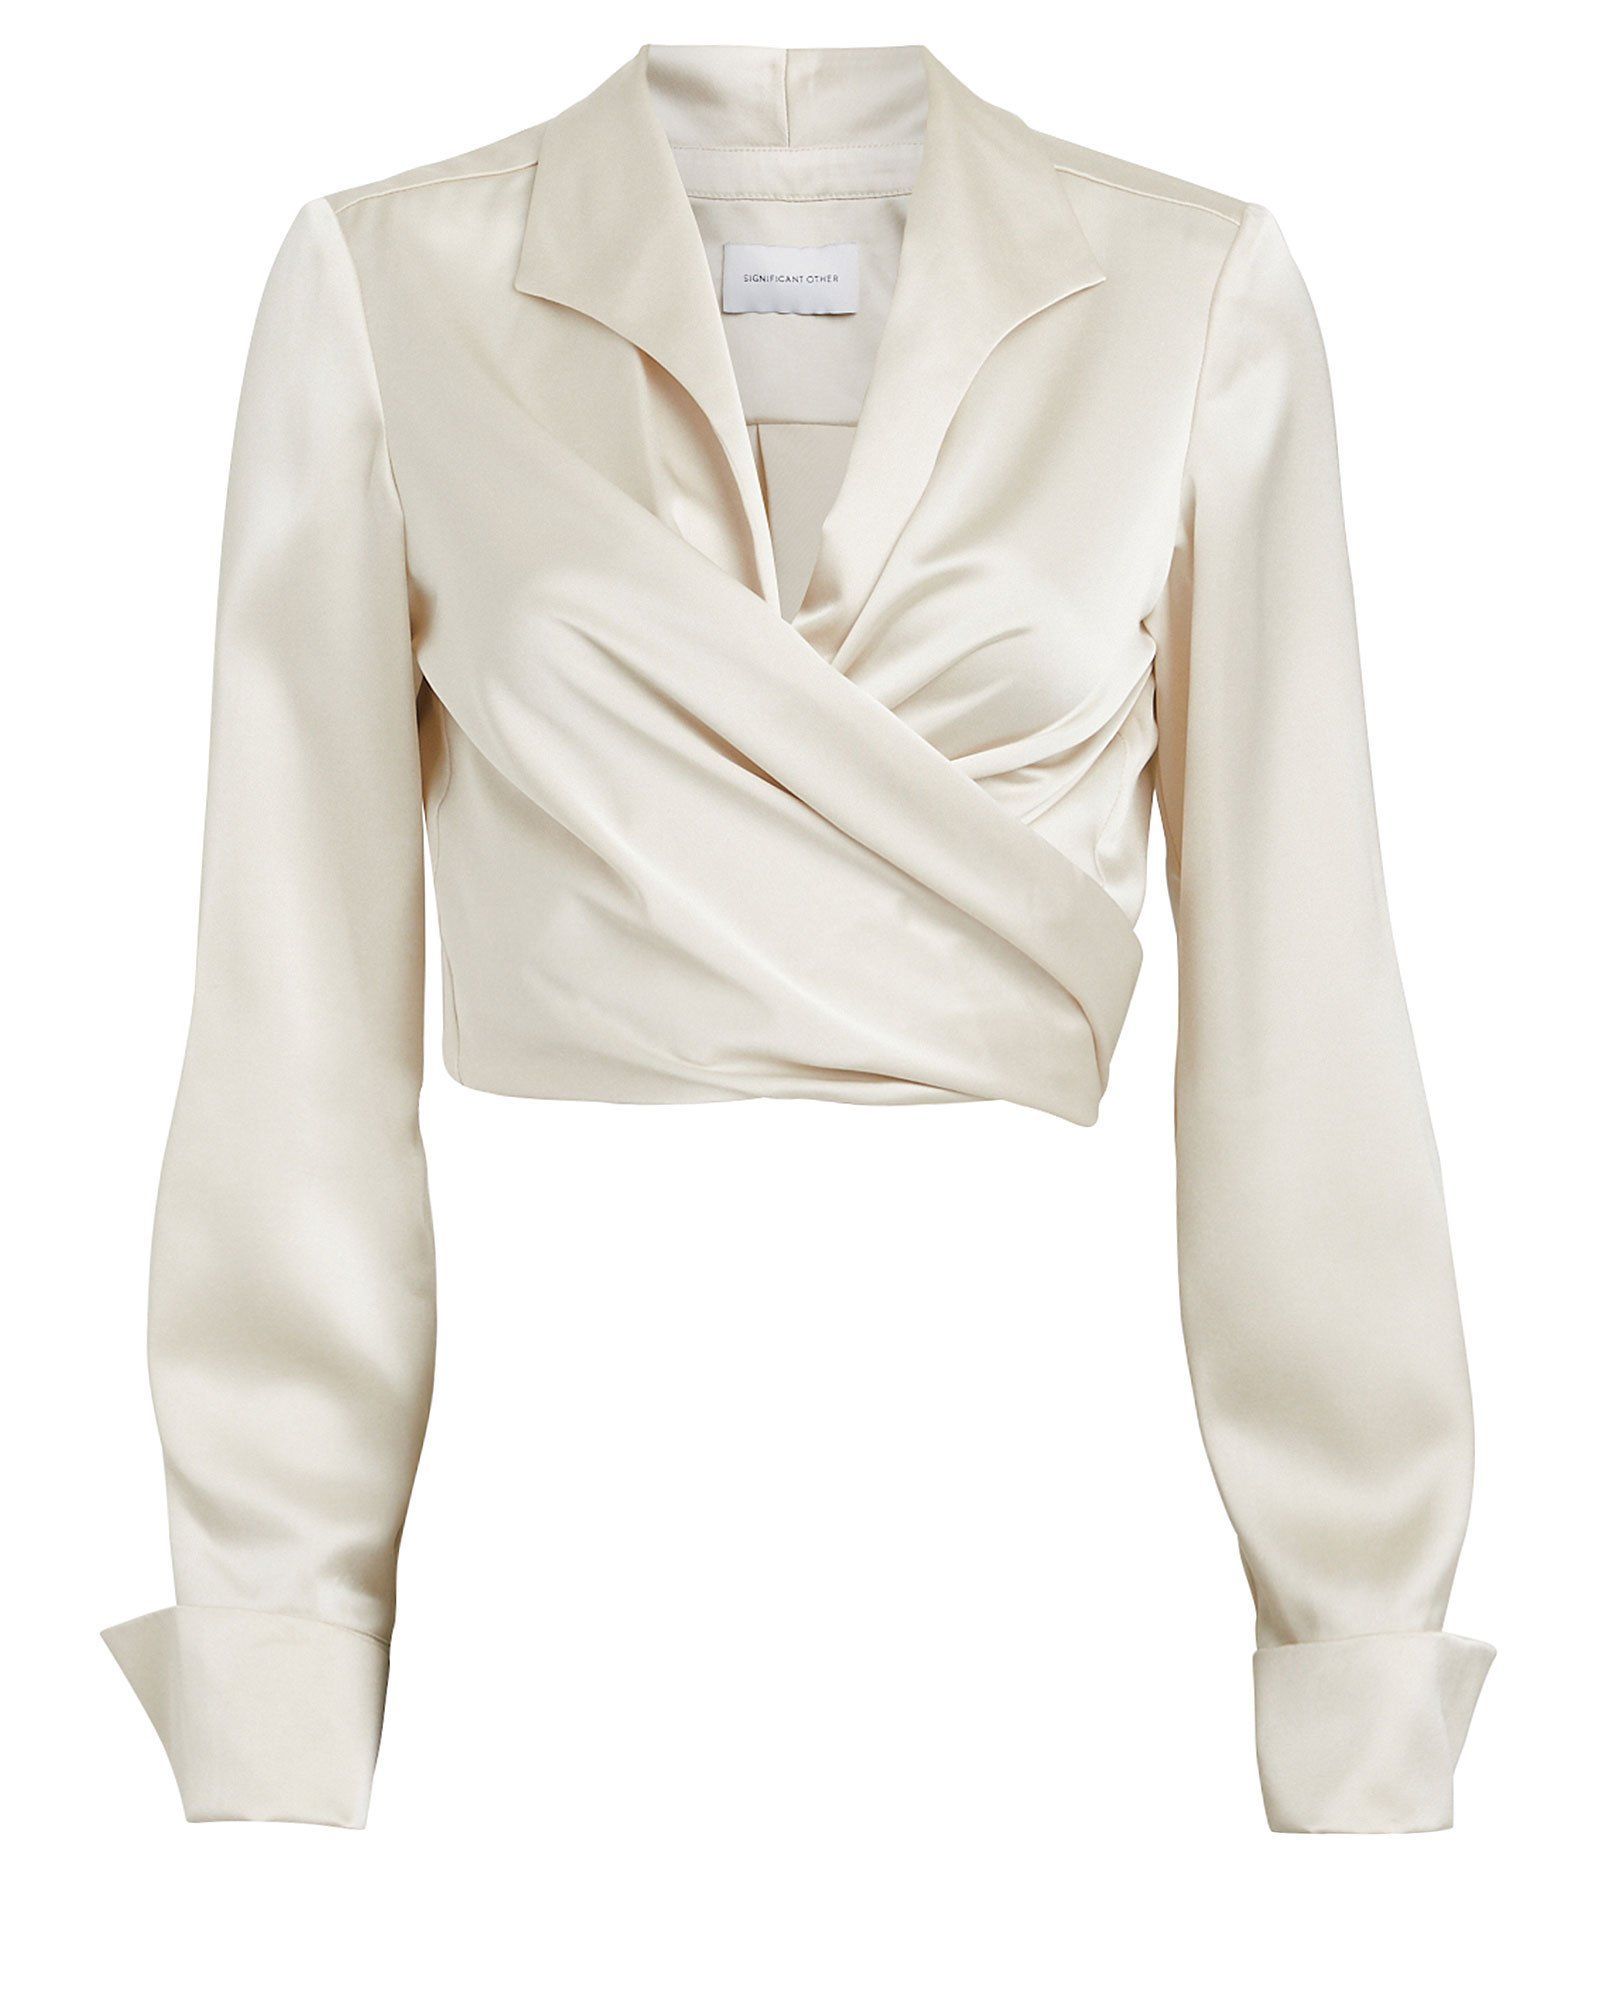 Elevate Your Look with a Luxurious Satin
Blouse: Effortlessly Elegant and Chic